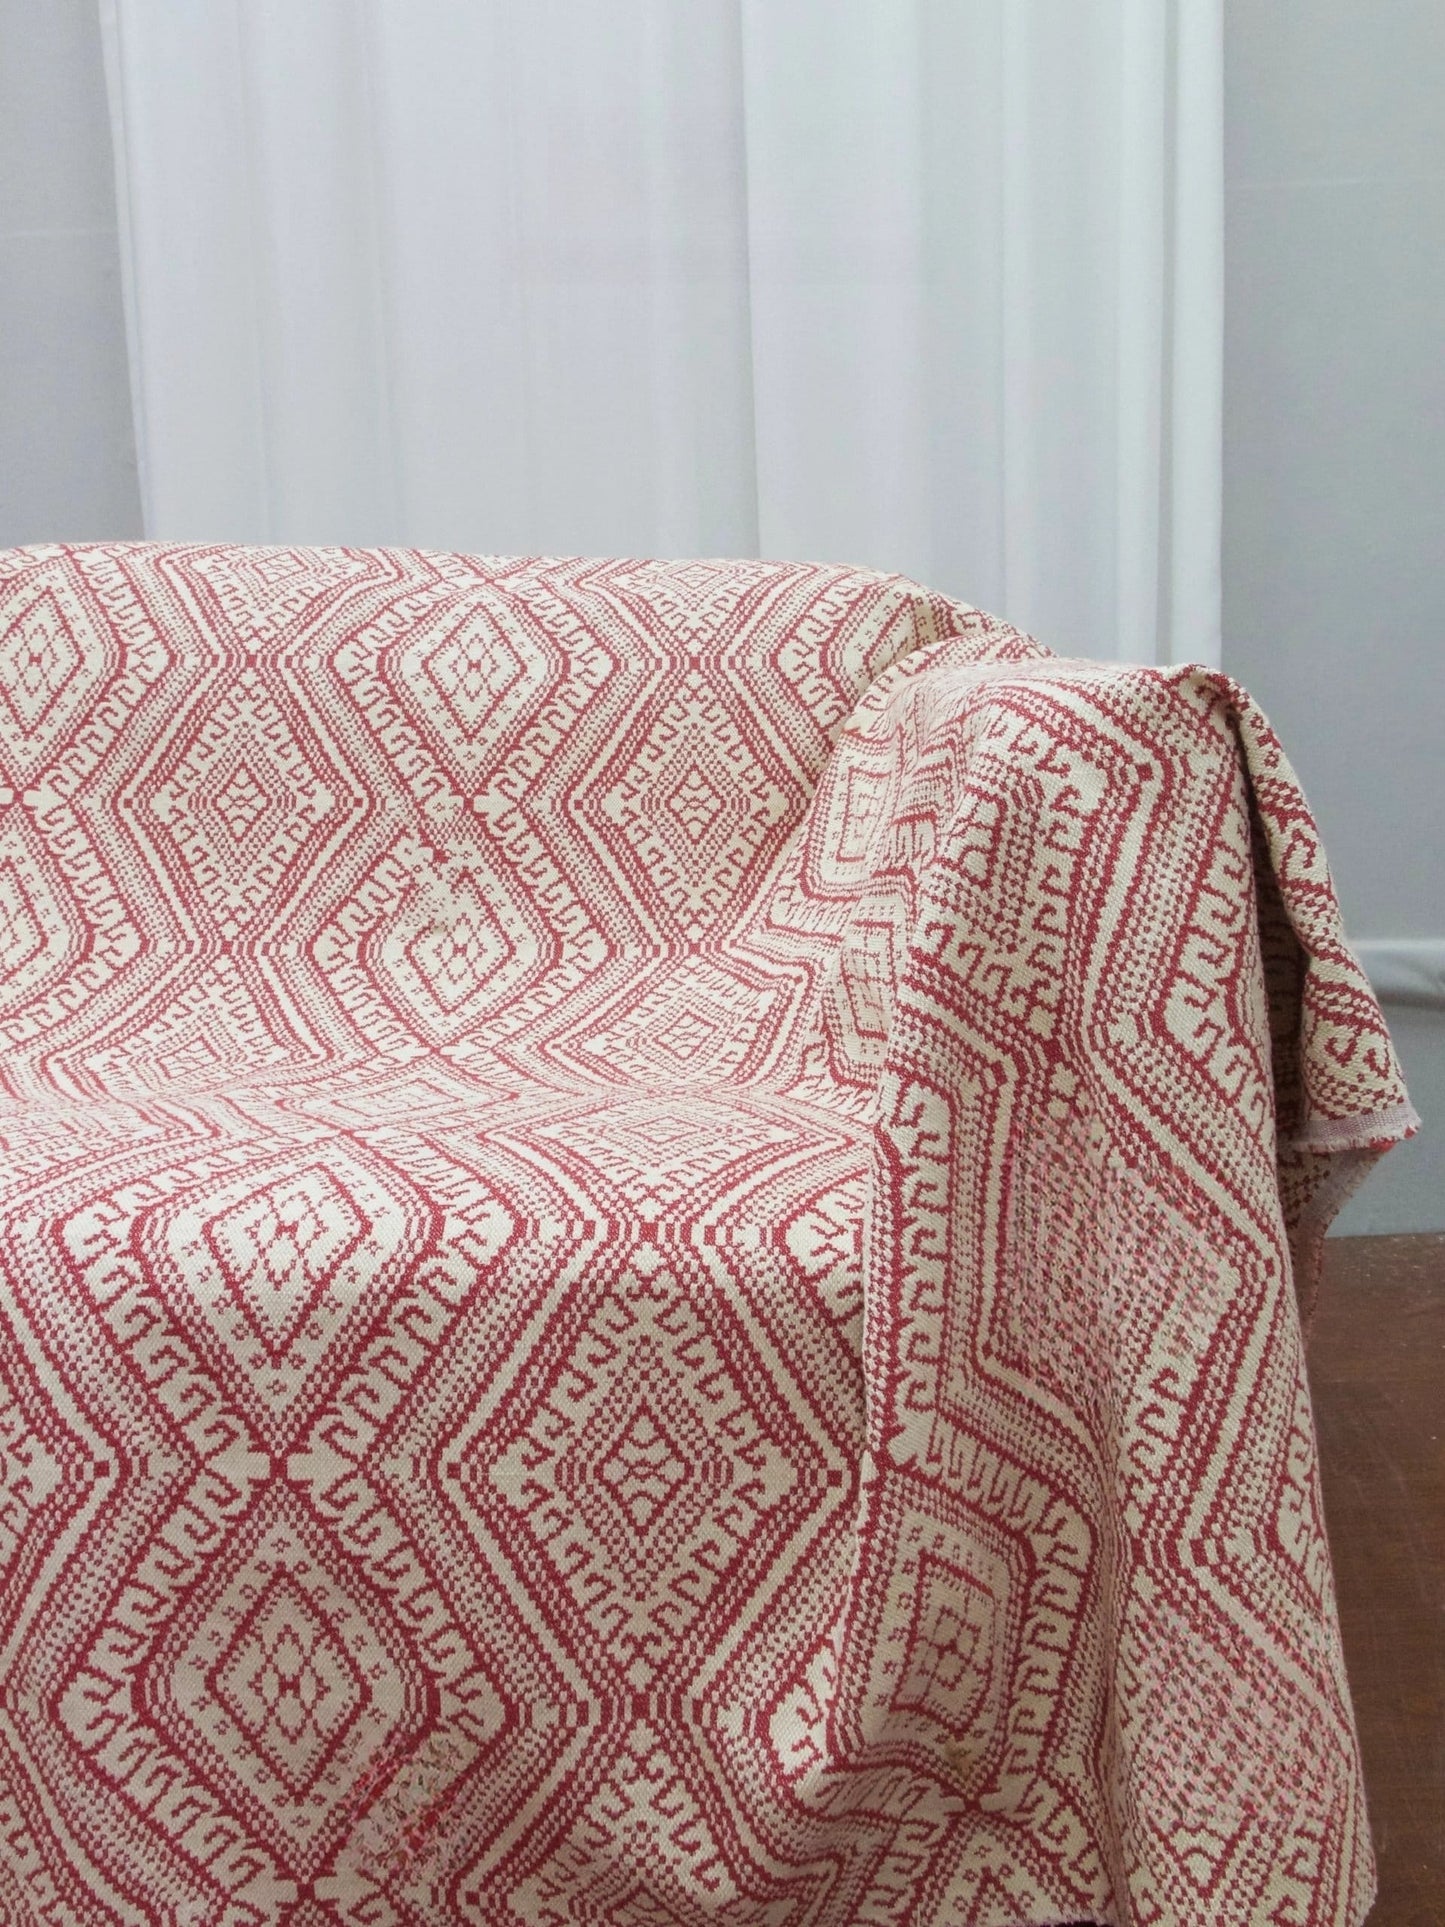 Brick Red Cotton Ethnic Upholstery Fabric|Antique Farmhouse Fabric For Chair,Sofa,Couch|Easter Diamond Pattern Upholstery Fabric